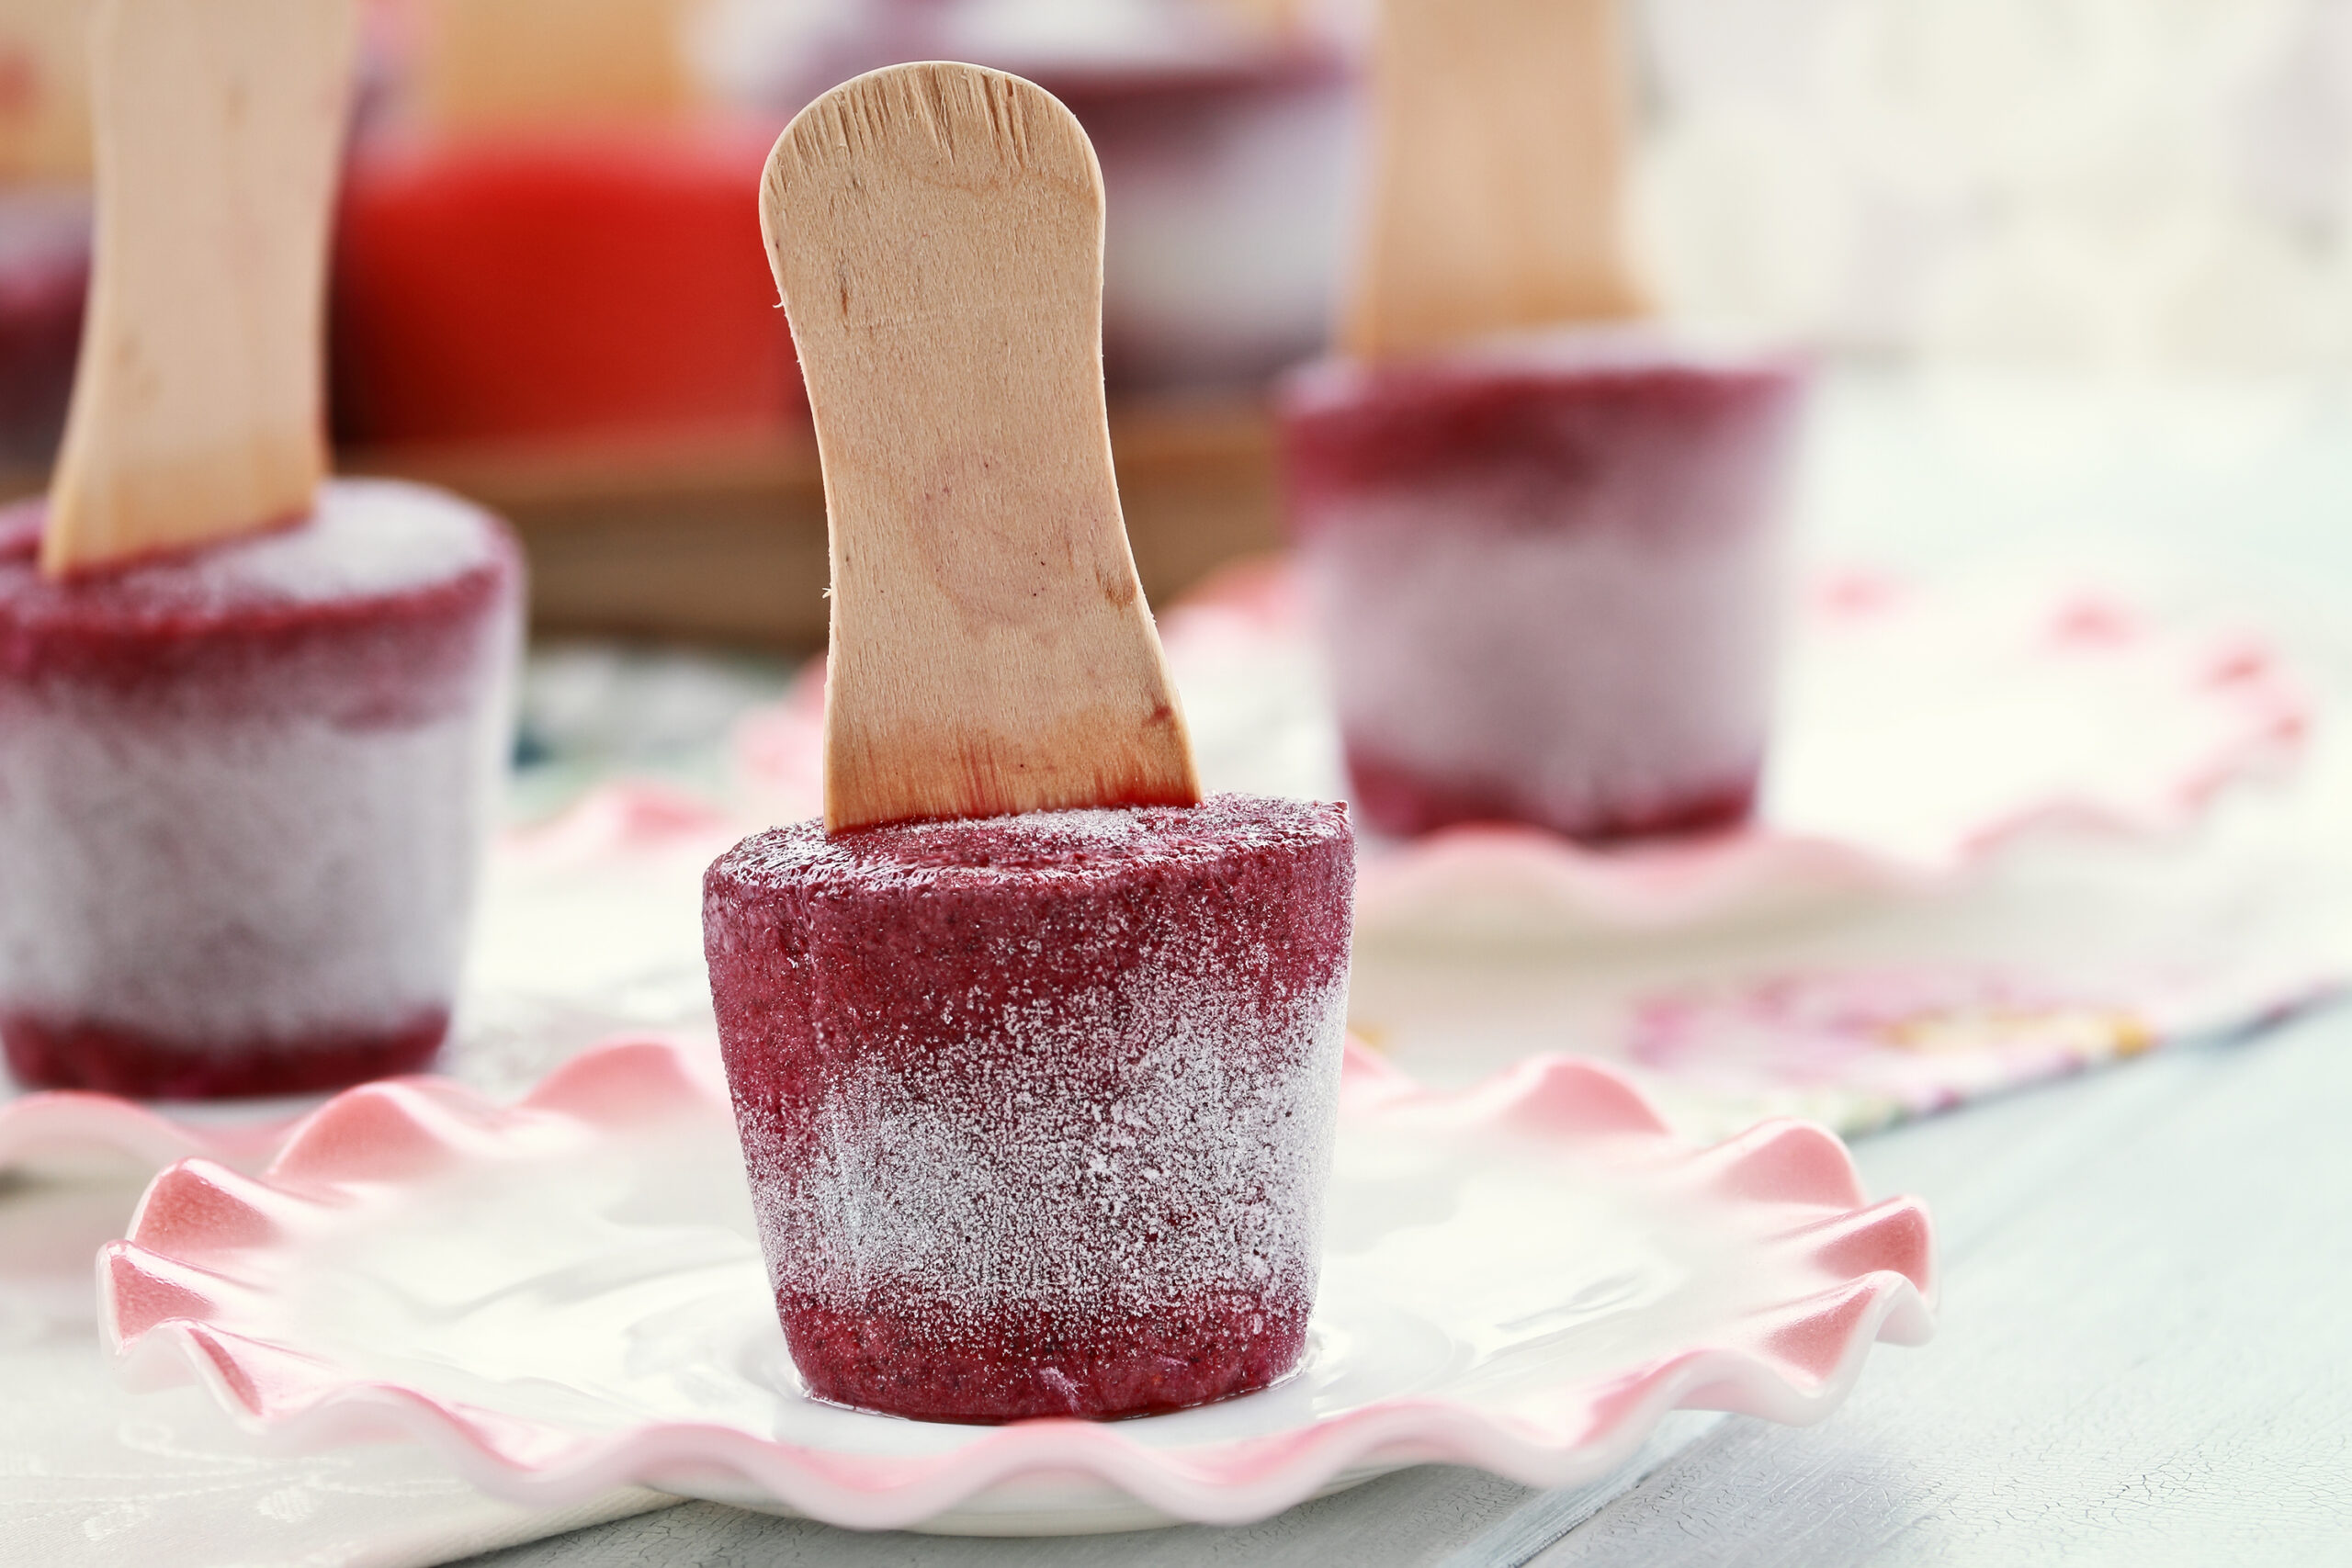 Blueberry popsicles made from blueberries and yogurt. Extreme shallow depth of field with selective focus on  popsicle in front.